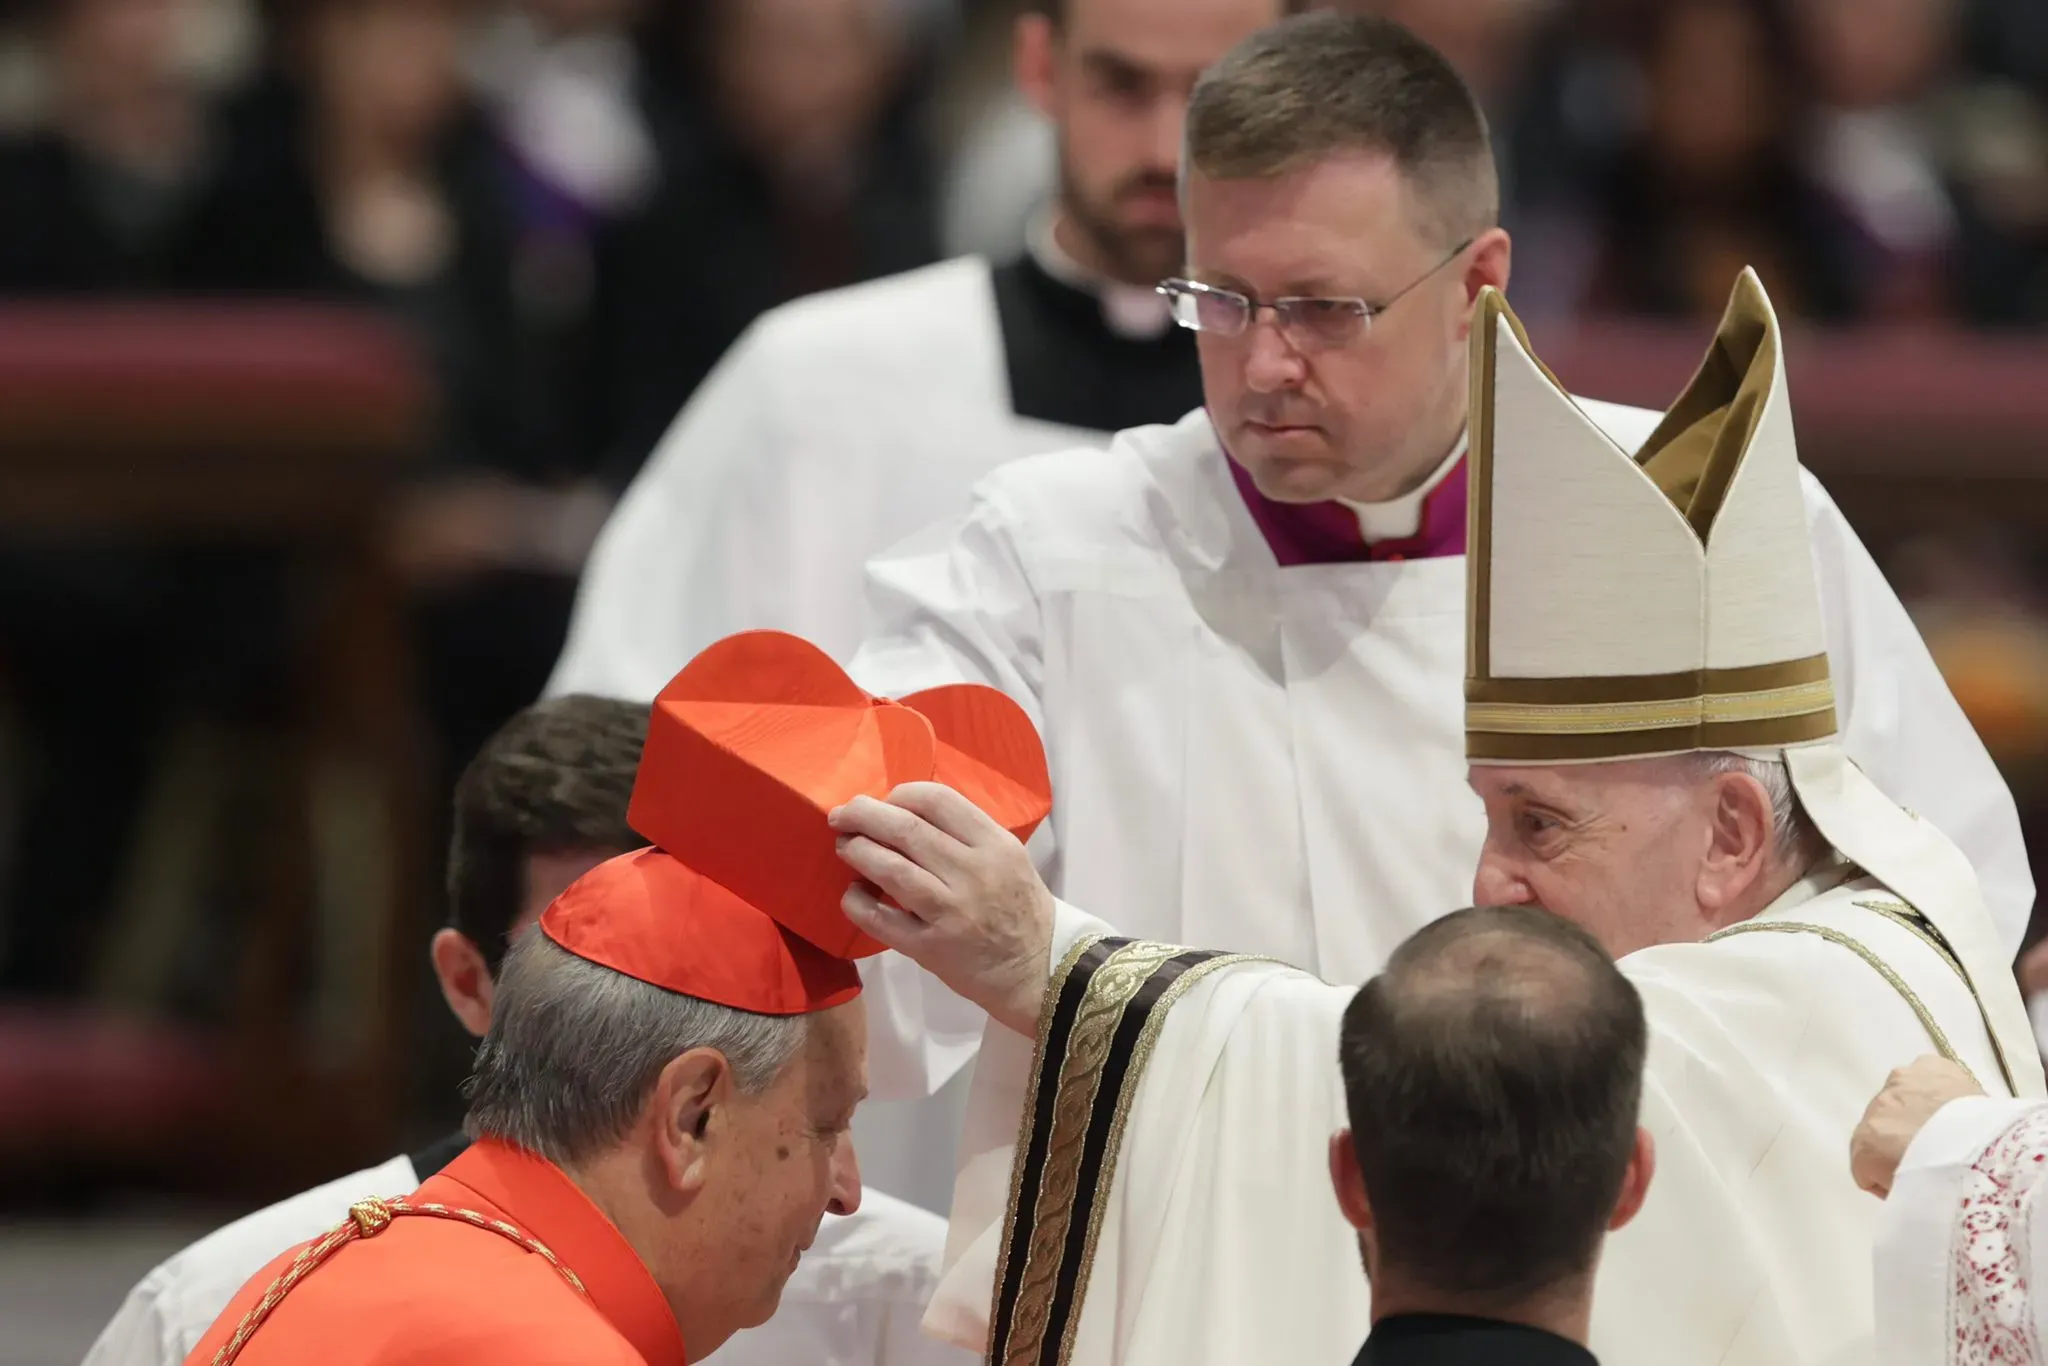 Cardinal Oscar Cantoni, bishop of Como, receives the red biretta from Pope Francis at the consistory in St. Peter's Basilica, Aug. 27, 2022. Daniel Ibáñez / CNA